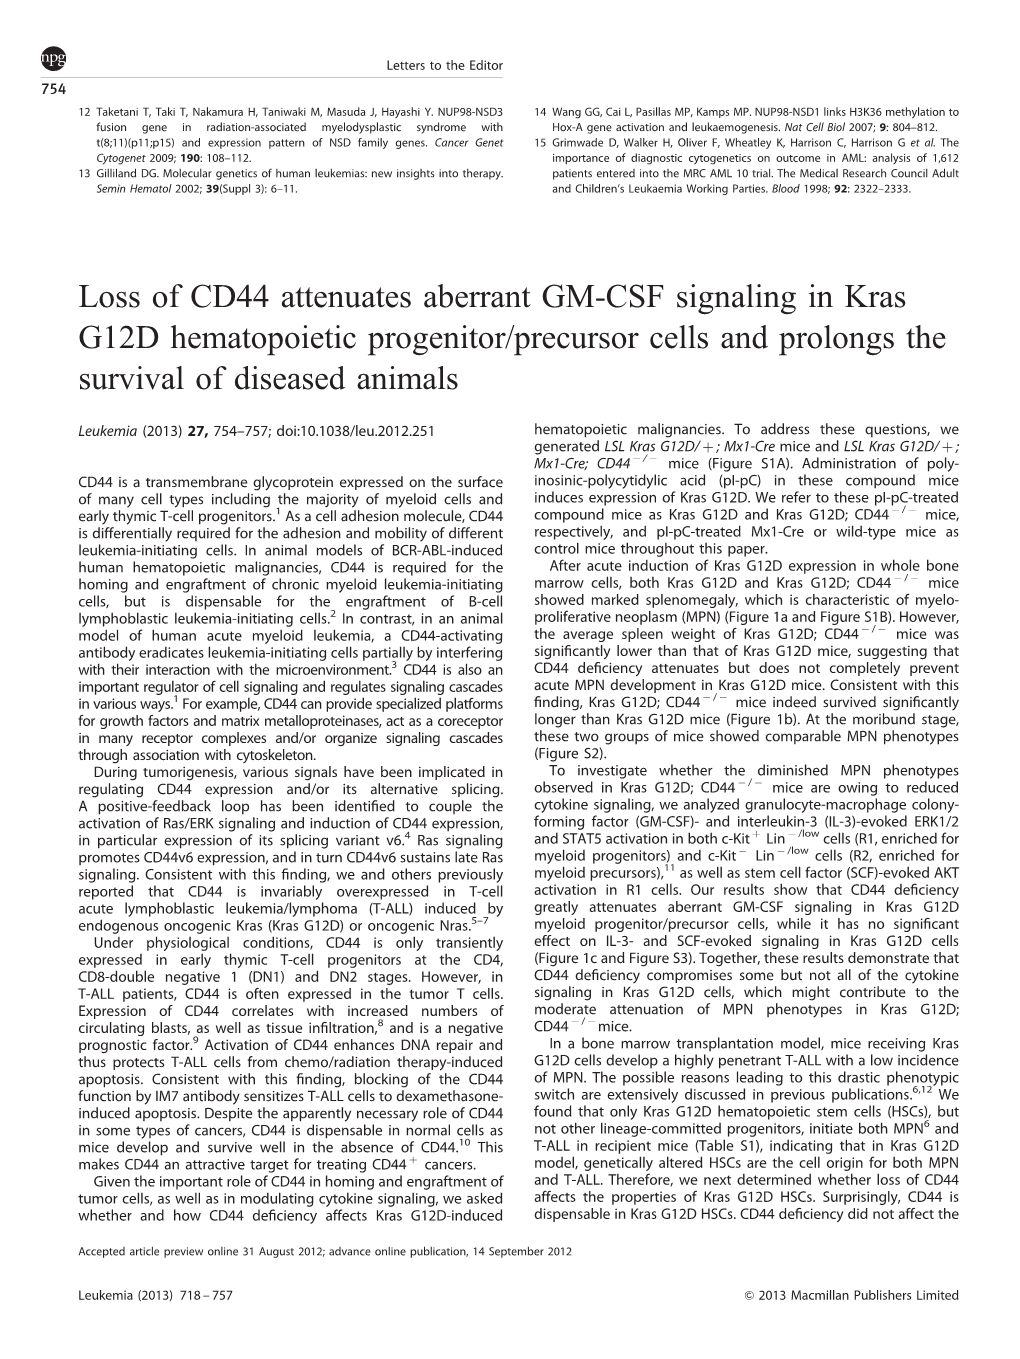 Loss of CD44 Attenuates Aberrant GM-CSF Signaling in Kras G12D Hematopoietic Progenitor/Precursor Cells and Prolongs the Survival of Diseased Animals